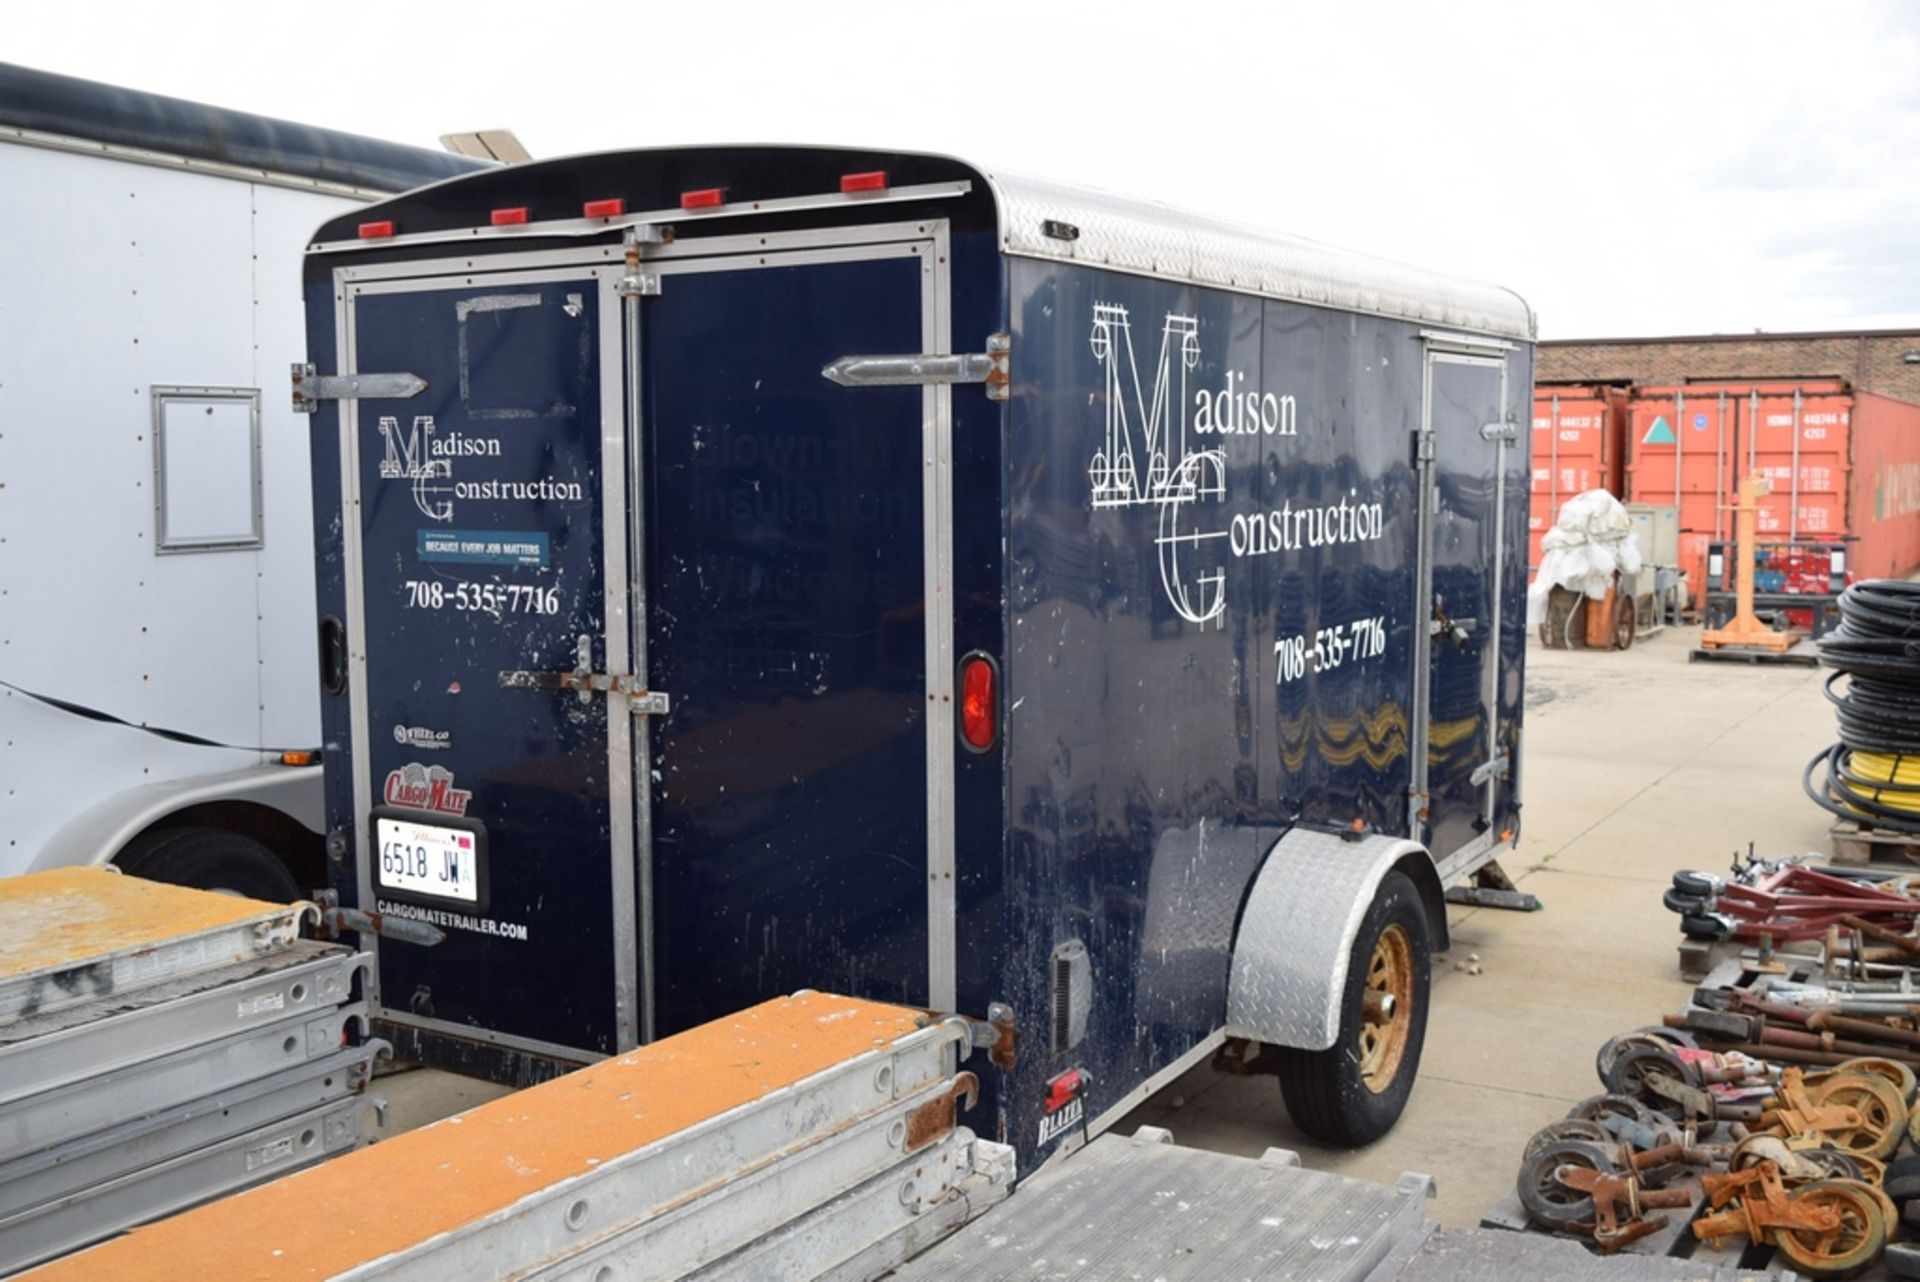 CARGO MATE 12' BLND69537 S/A ENCLOSED CARGO TRAILER VIN: 5NHUBL216AW069537, 3,00LB. CAP. - Image 3 of 3